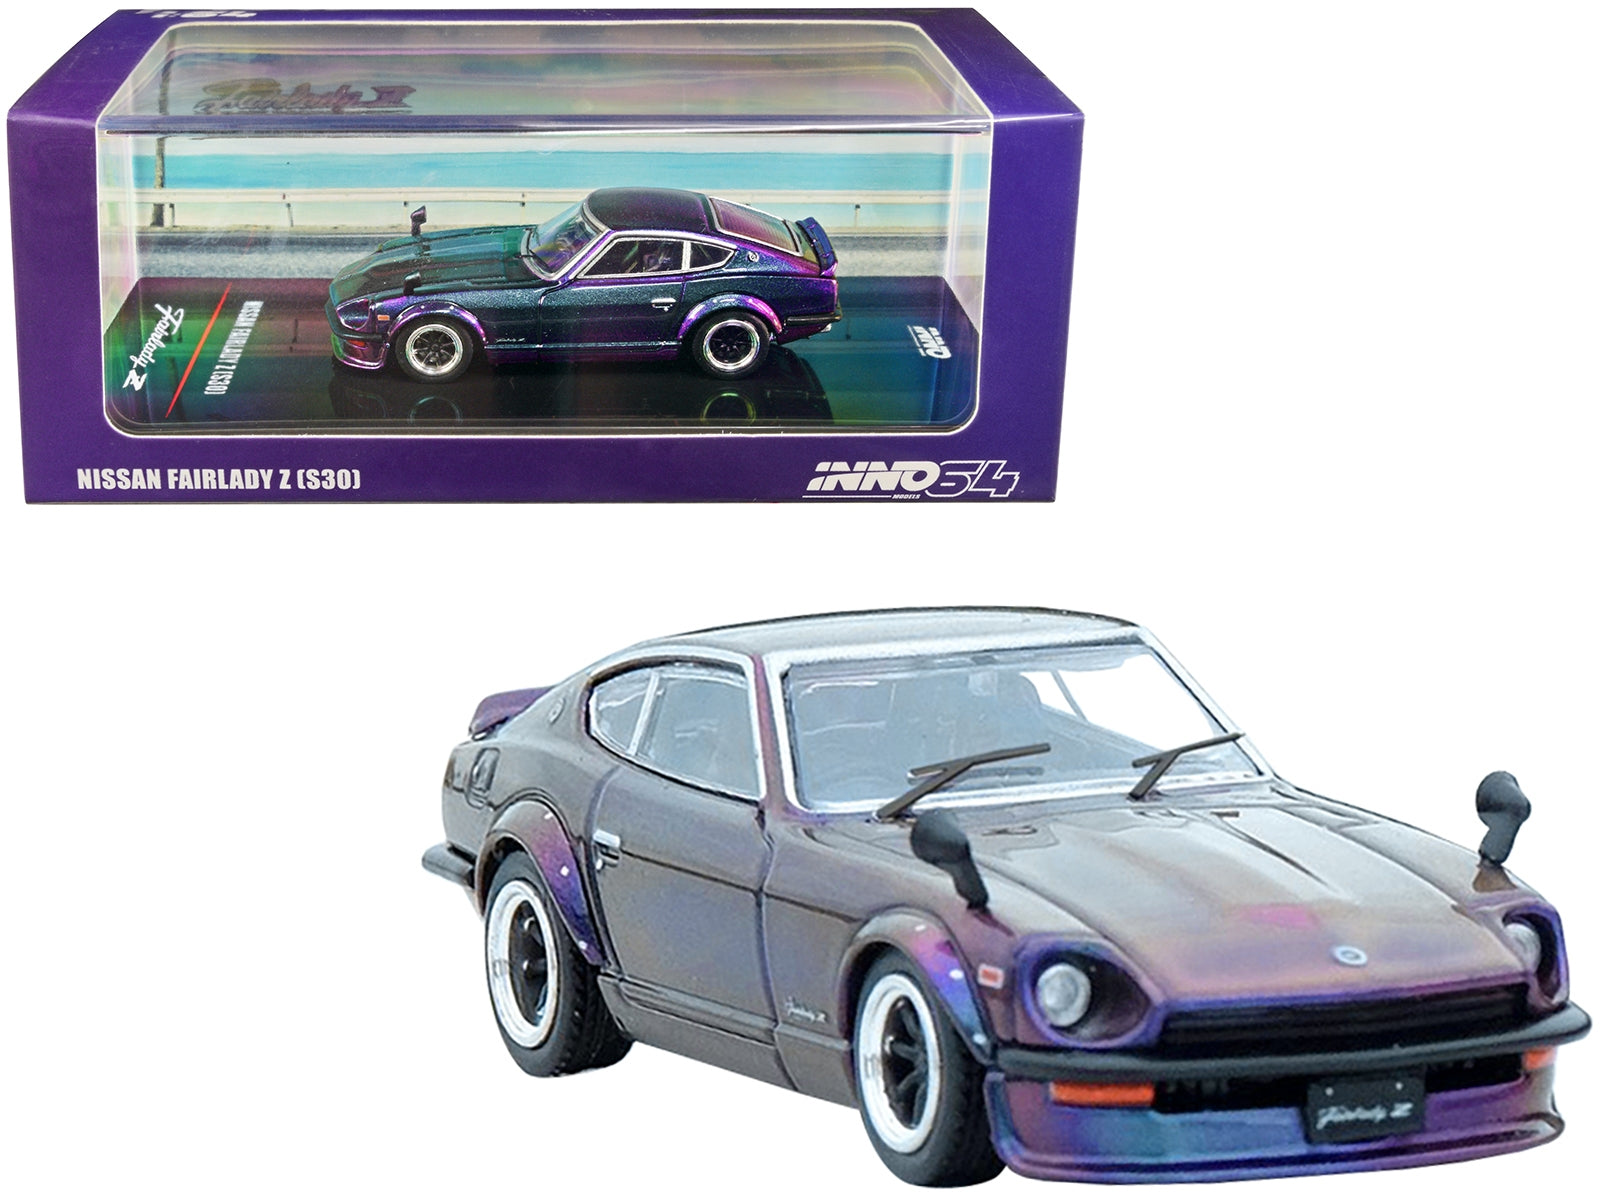 Nissan Fairlady Z (S30) RHD (Right Hand Drive) Midnight Purple II Metallic "Hong Kong Ani-Com and Games 2022" Event Edition 1/64 Diecast Model Car by Inno Models - Homreo